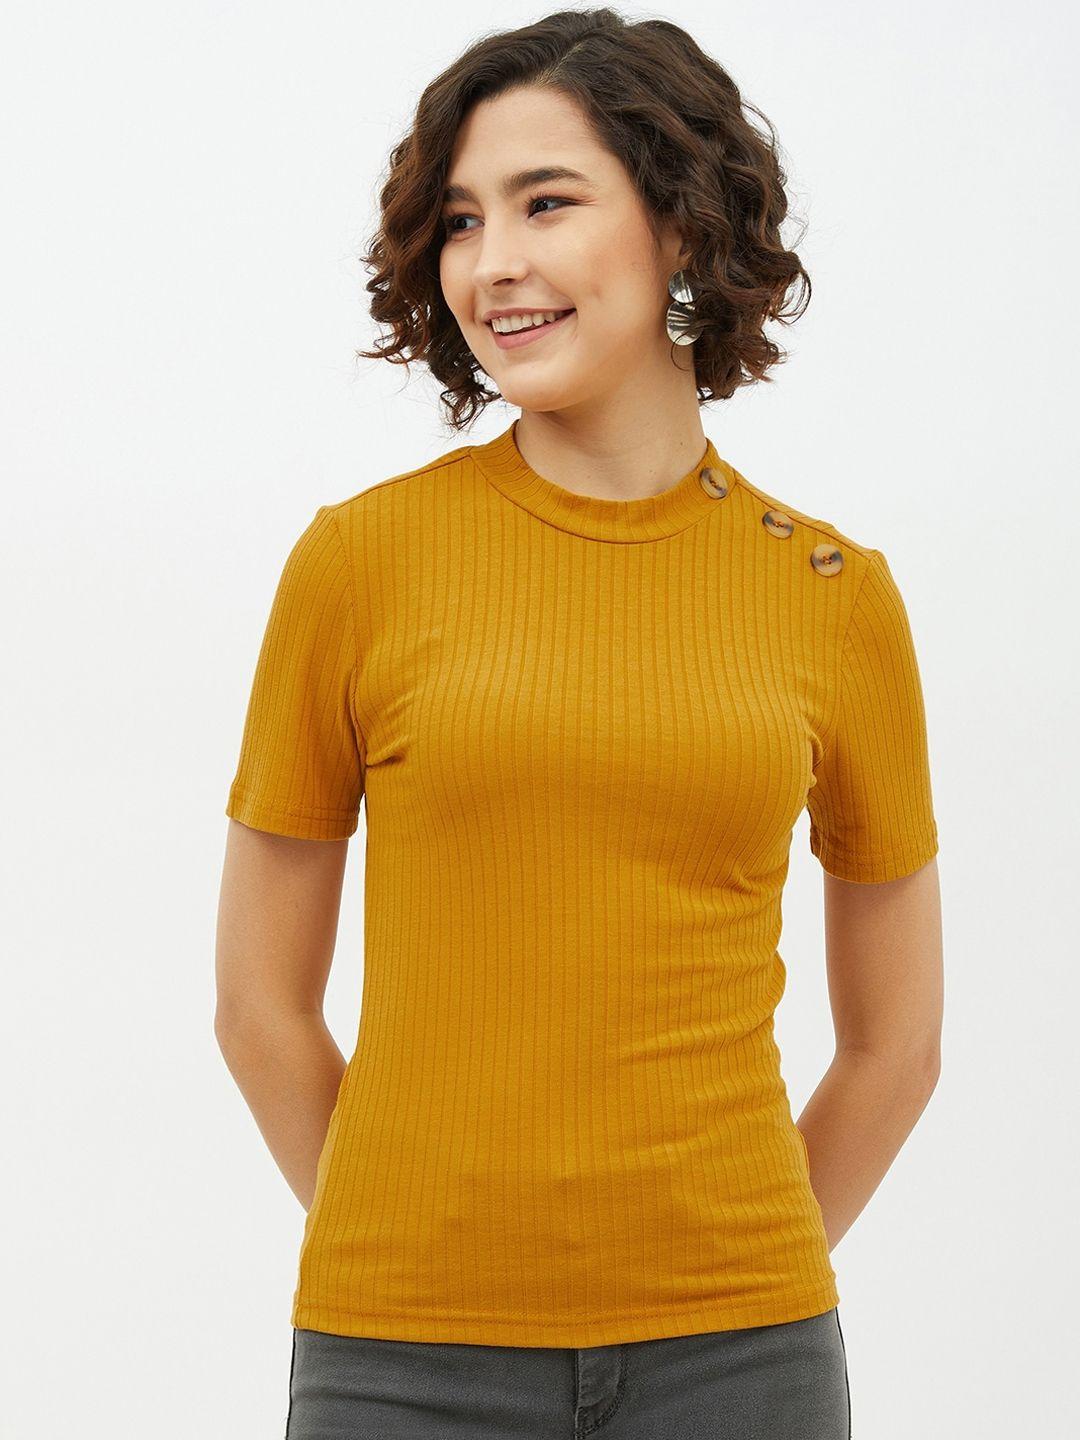 Harpa Mustard Yellow Knitted Fitted Top